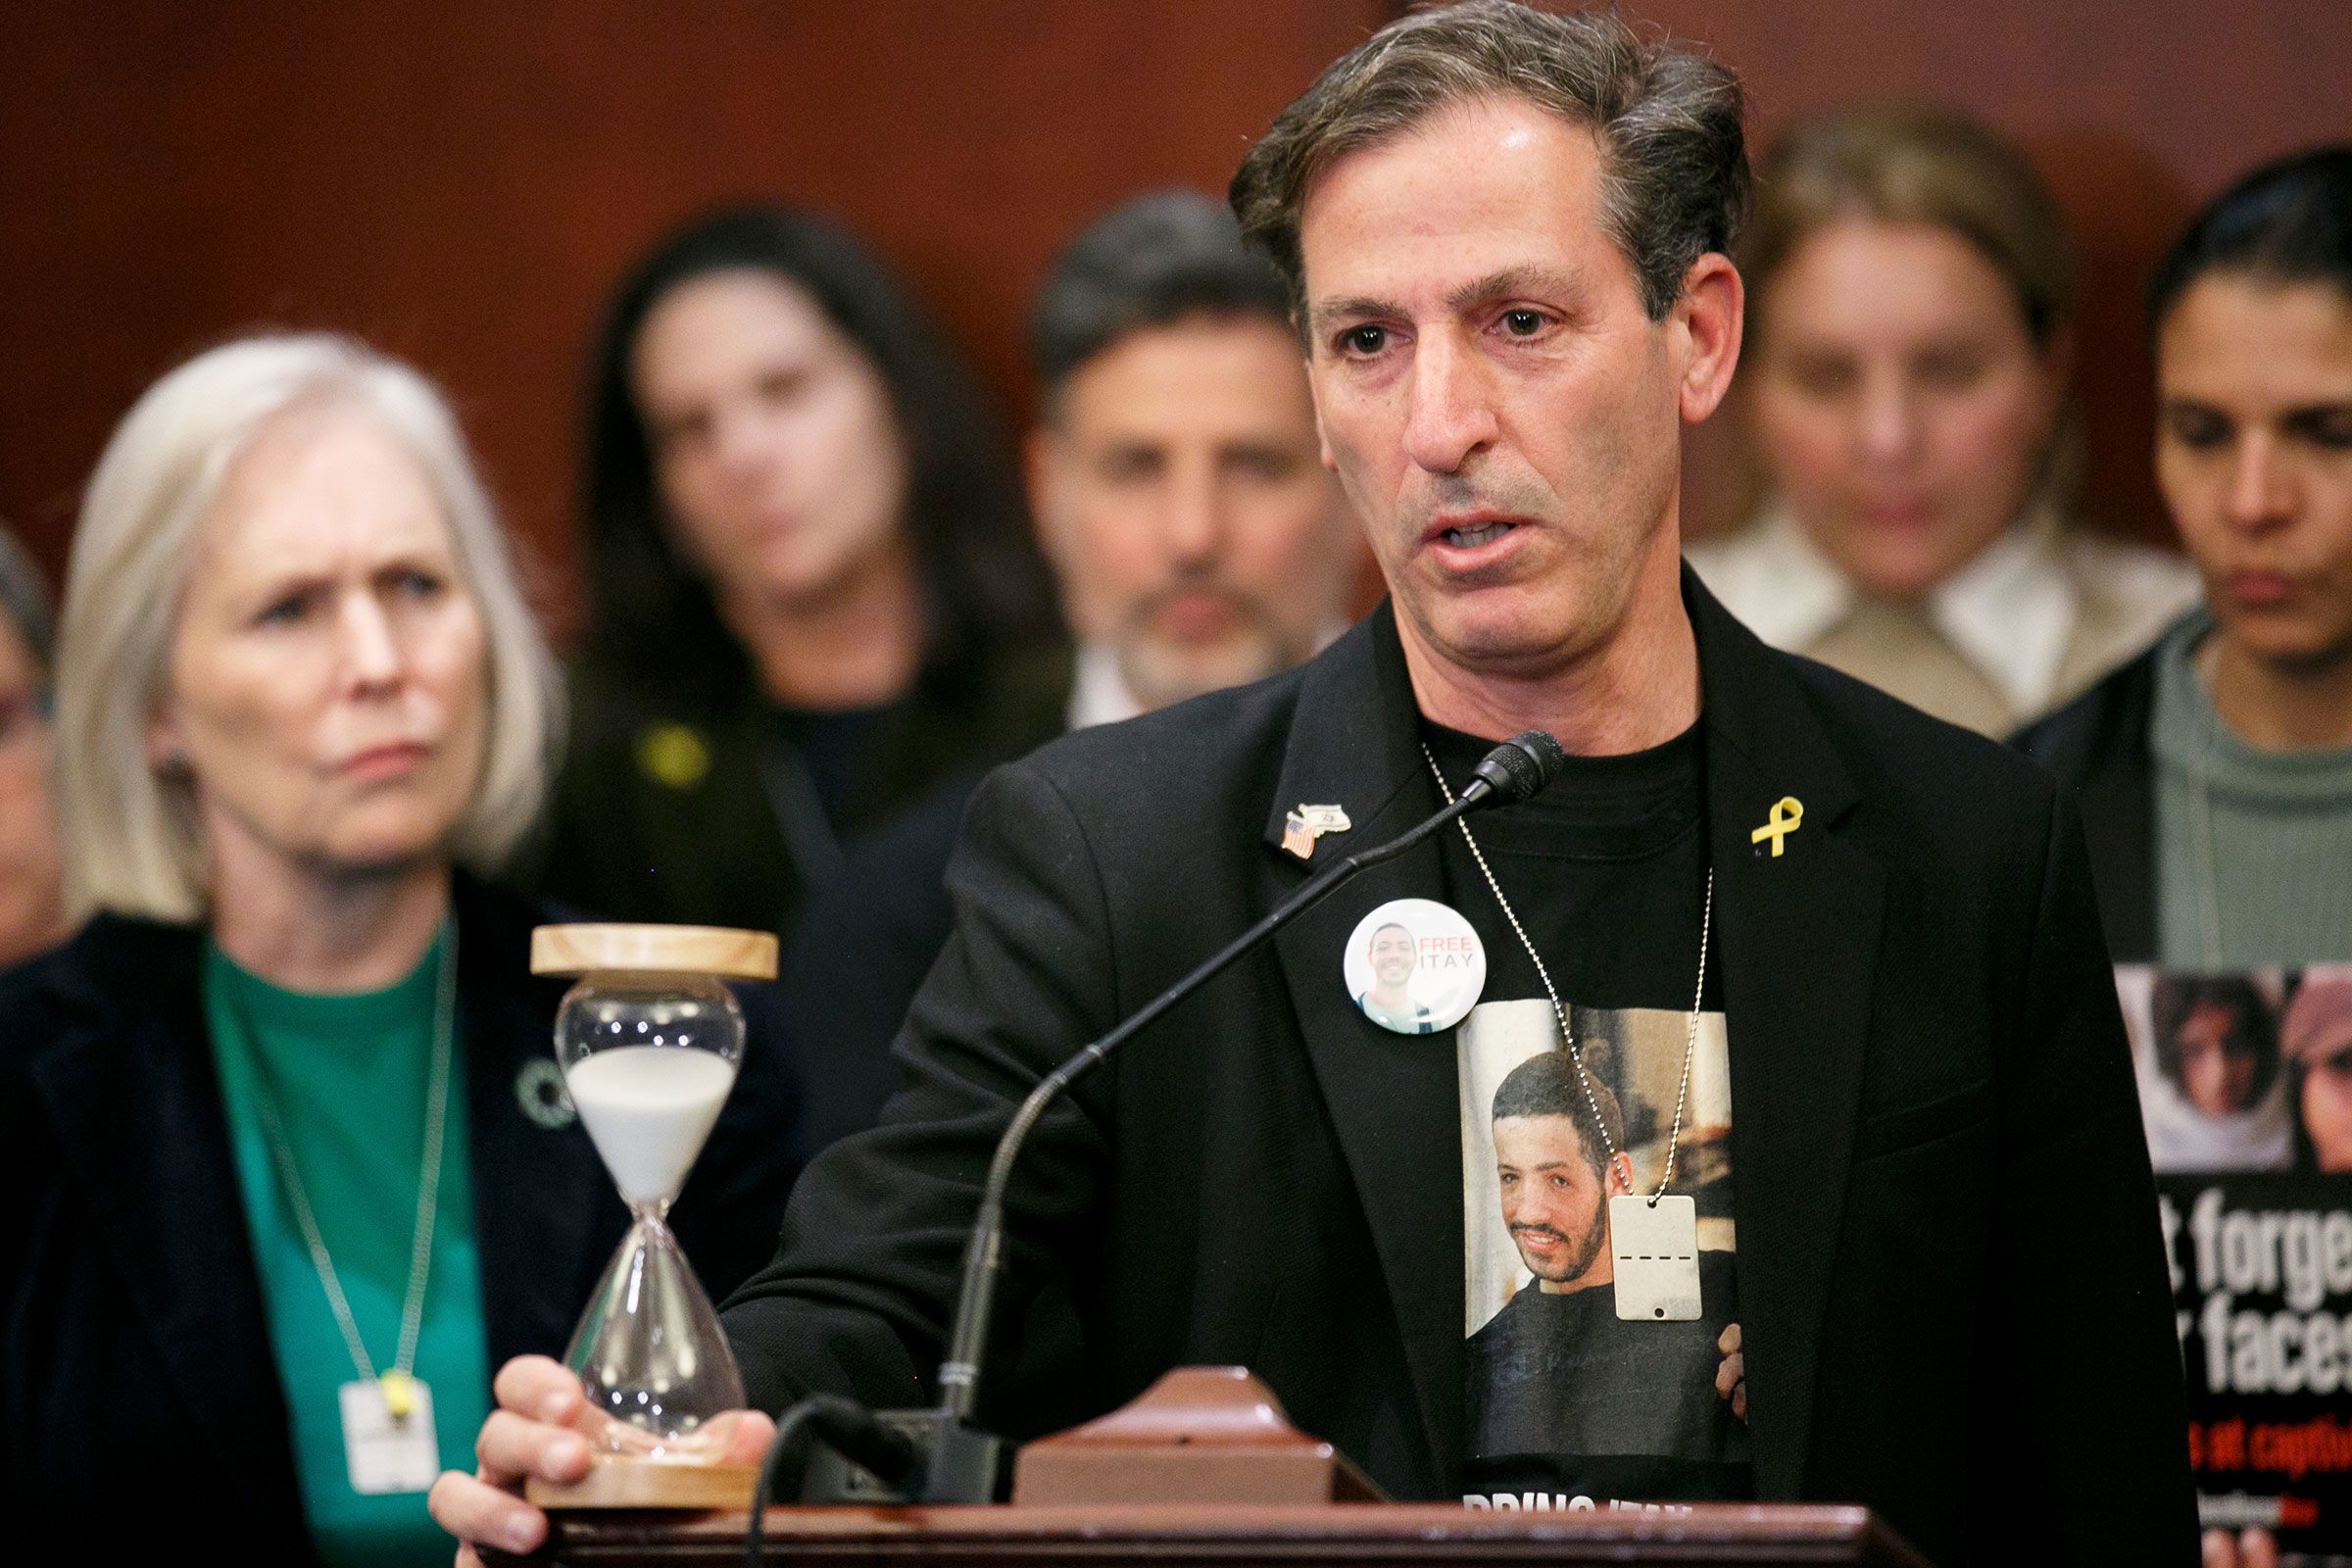 Ruby Chen, father of Itay Chen, who is being held hostage by Hamas, holds an hourglass while speaking a Senate Foreign Relations Committee bipartisan press conference at the US Capitol in Washington, DC, on January 17.